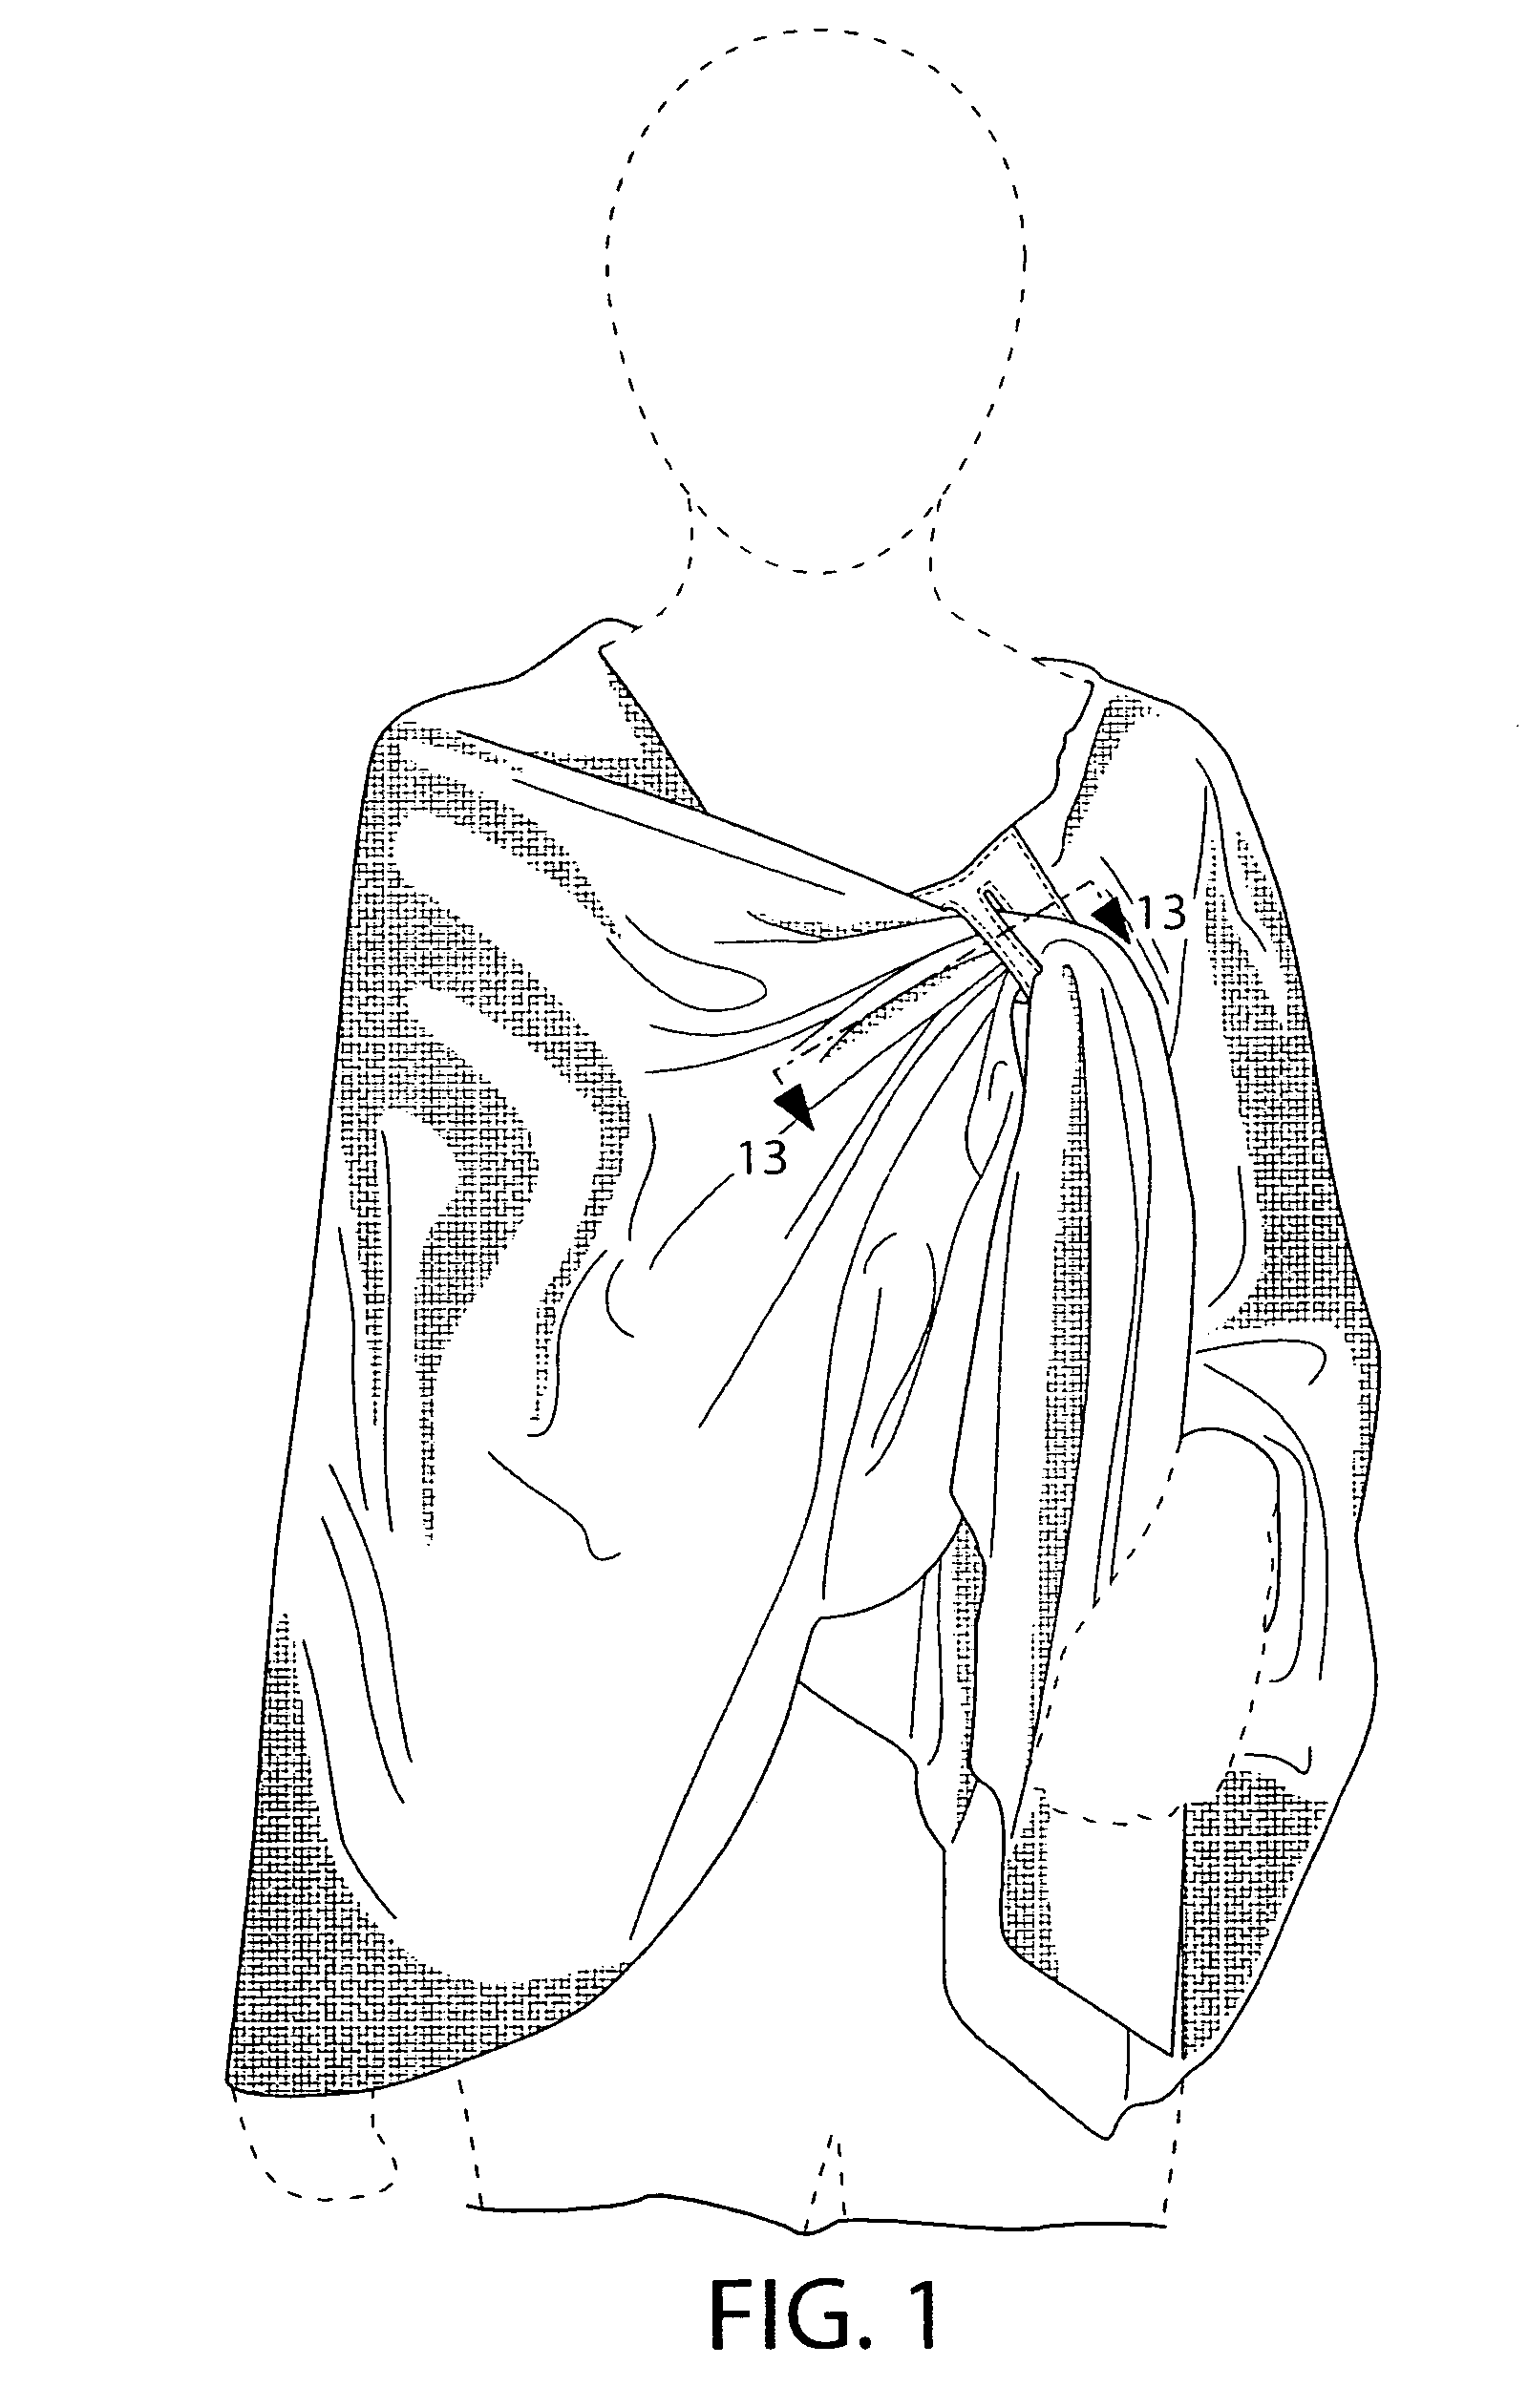 Shawl or wrap with closure mechanism